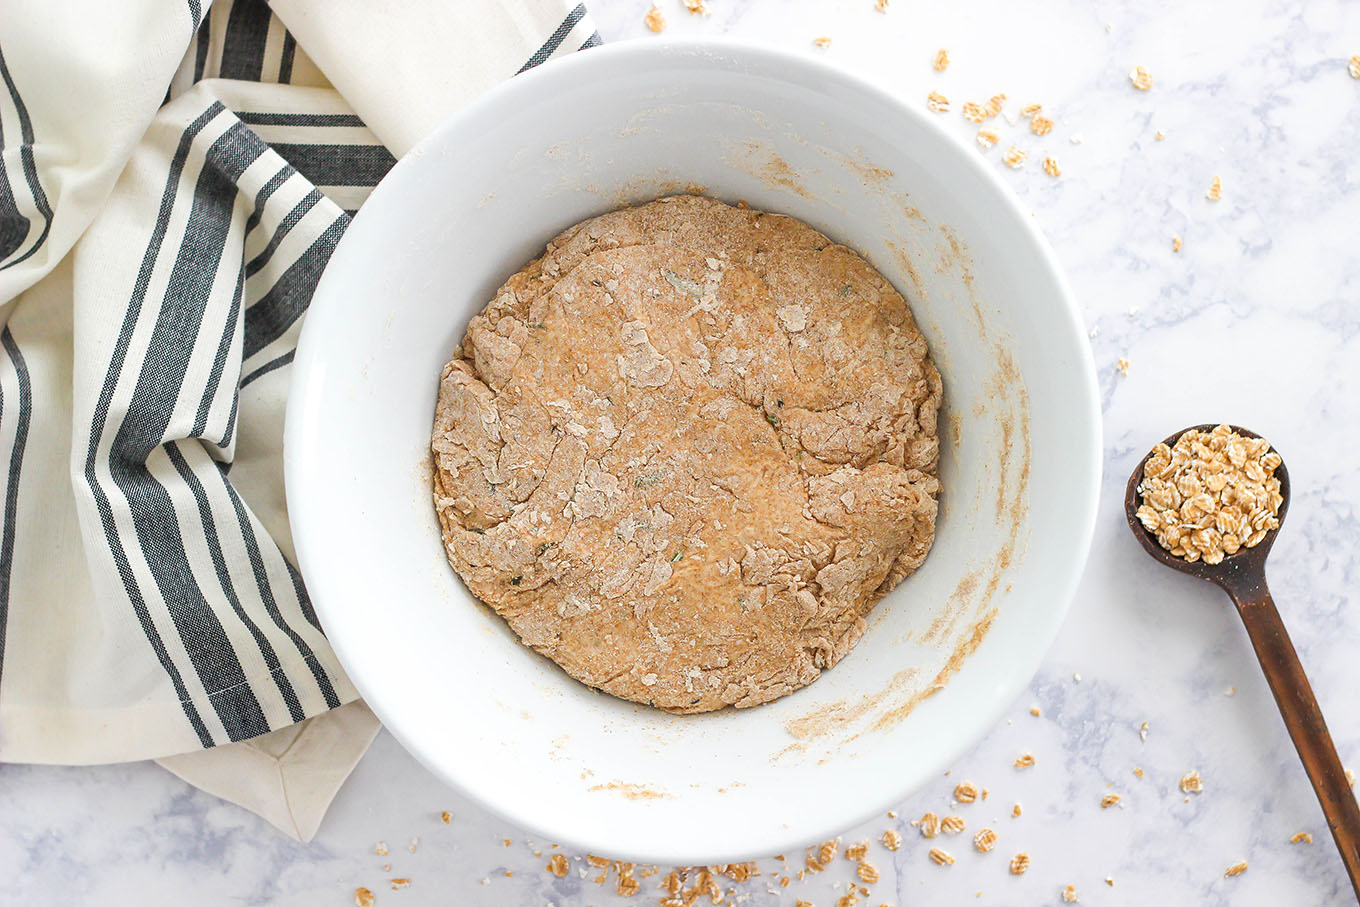 This No-Knead Whole Wheat Rosemary Bread is the perfect recipe for beginners. Enjoy a hearty and healthy loaf of bread with just a few steps and a simple list of ingredients.